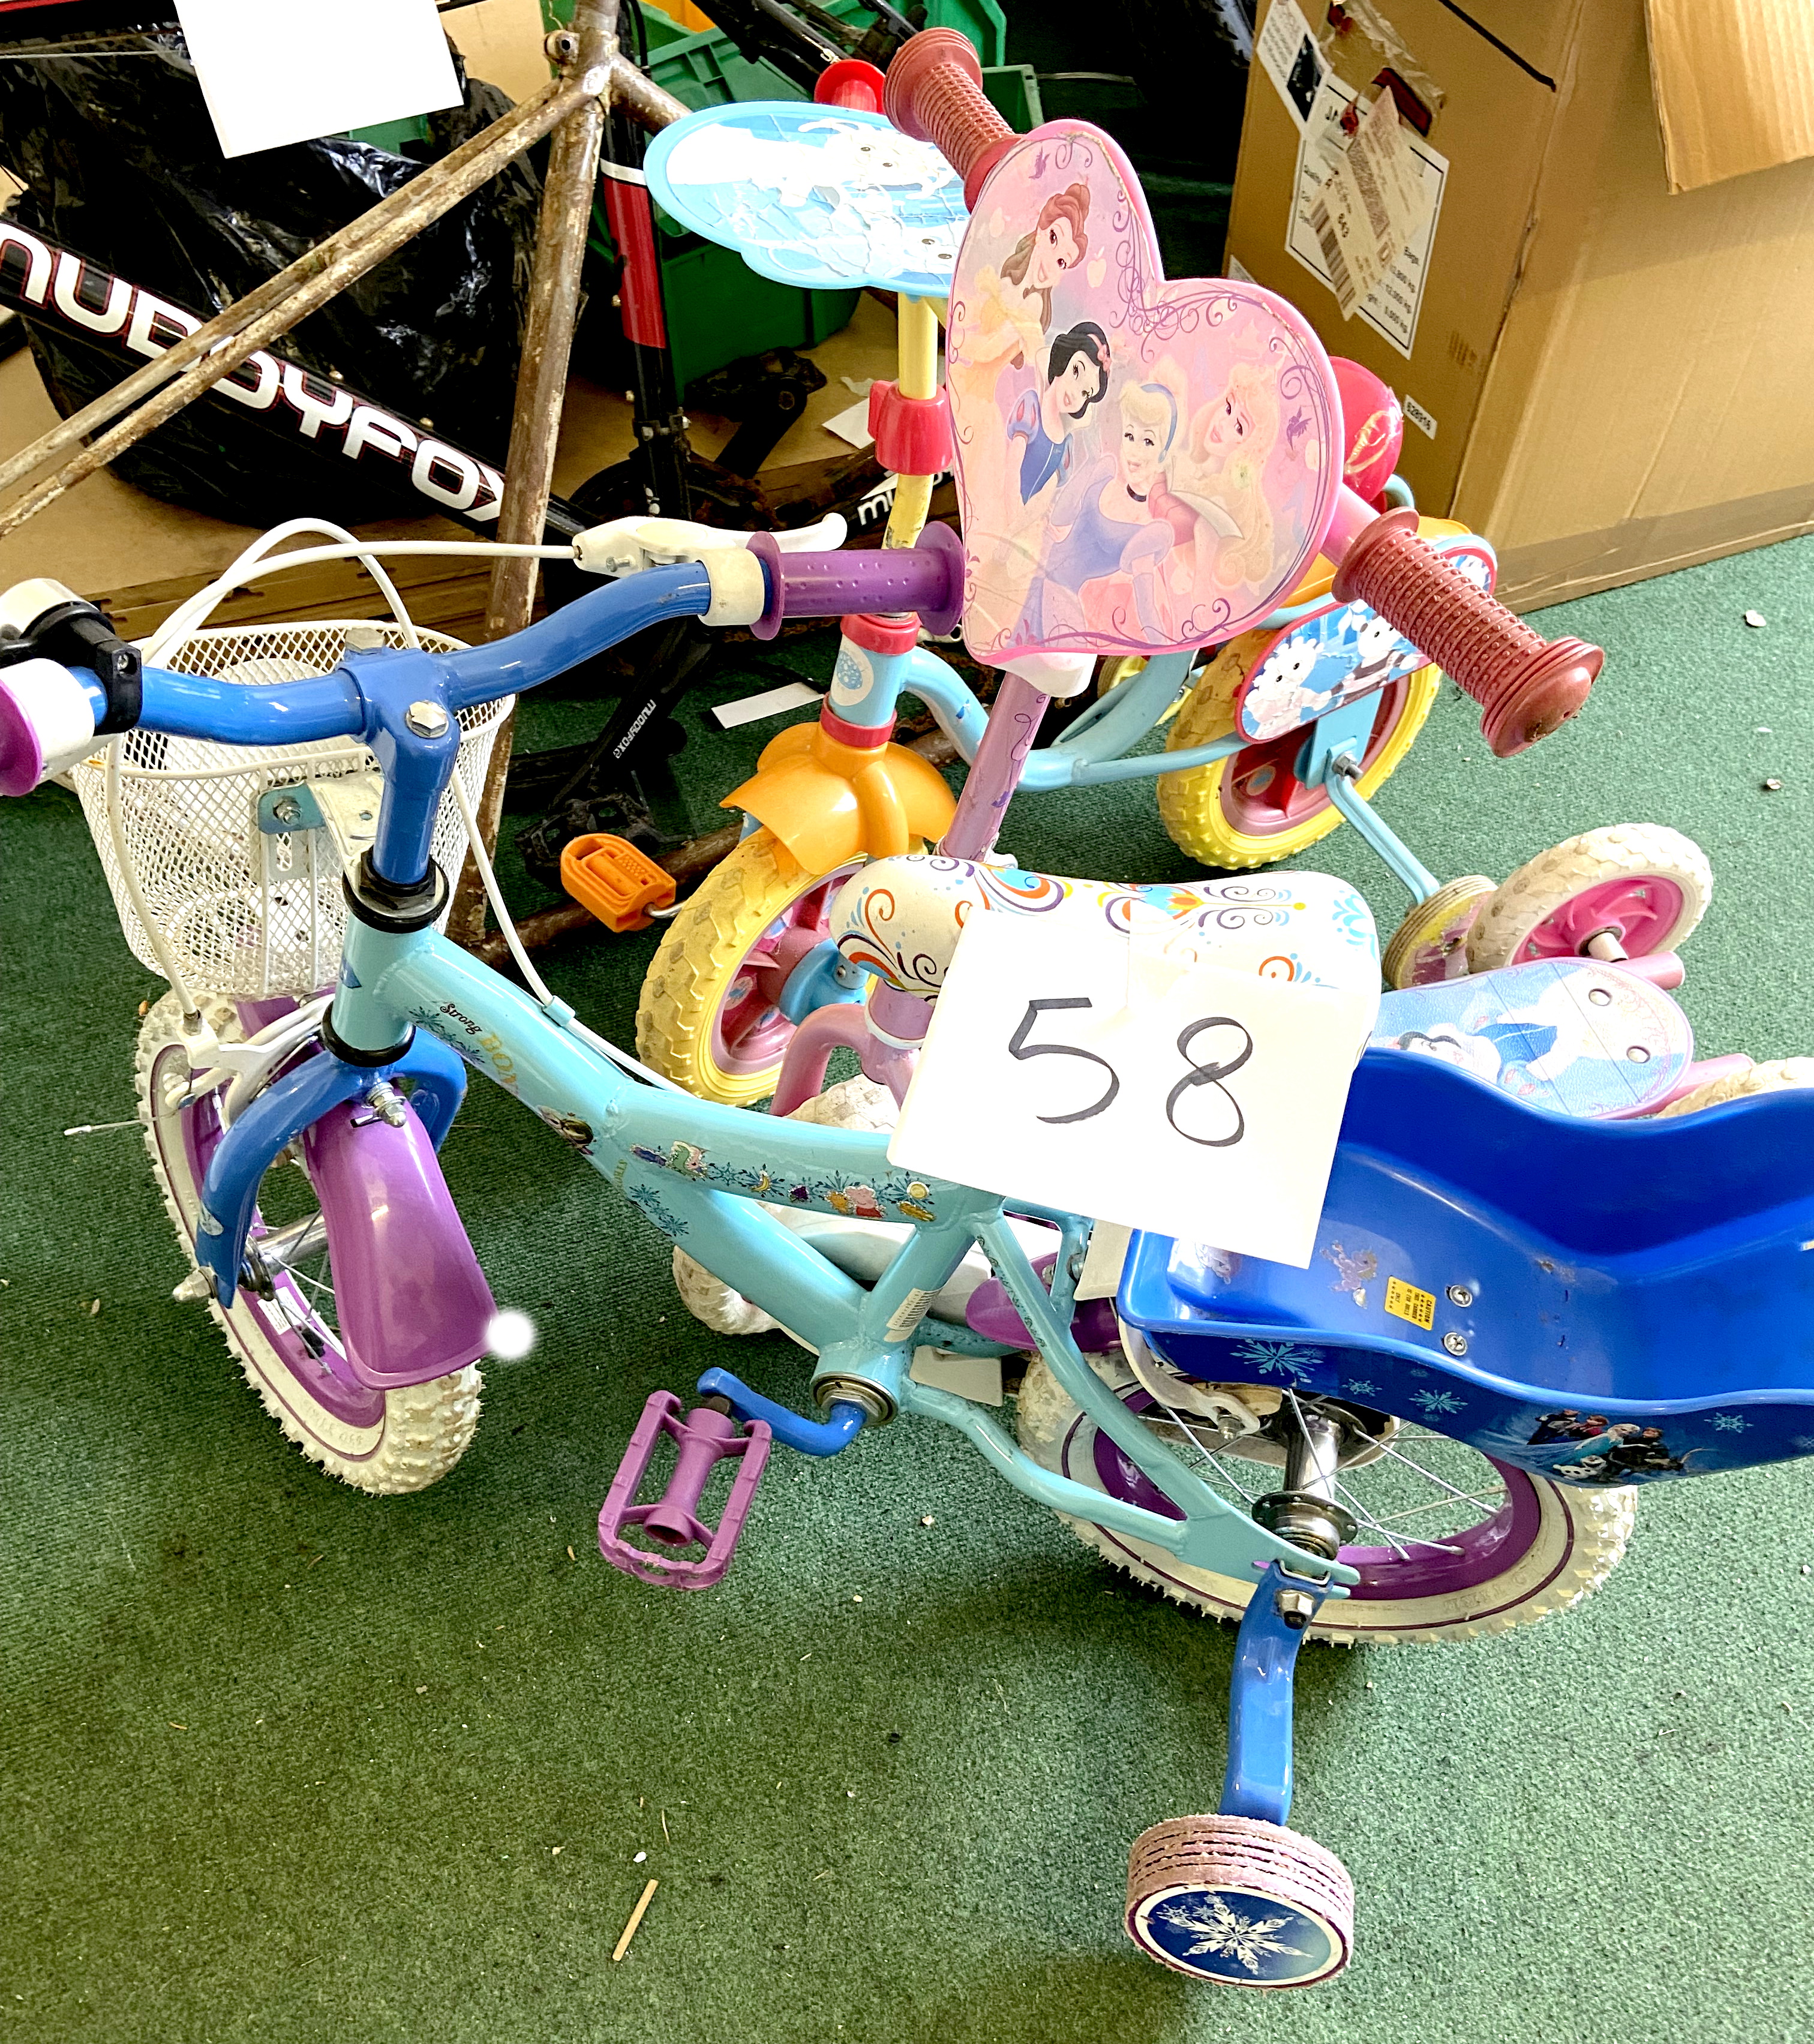 Two children's bikes, both with pale blue painted frames and stabilisers, together with a pink '